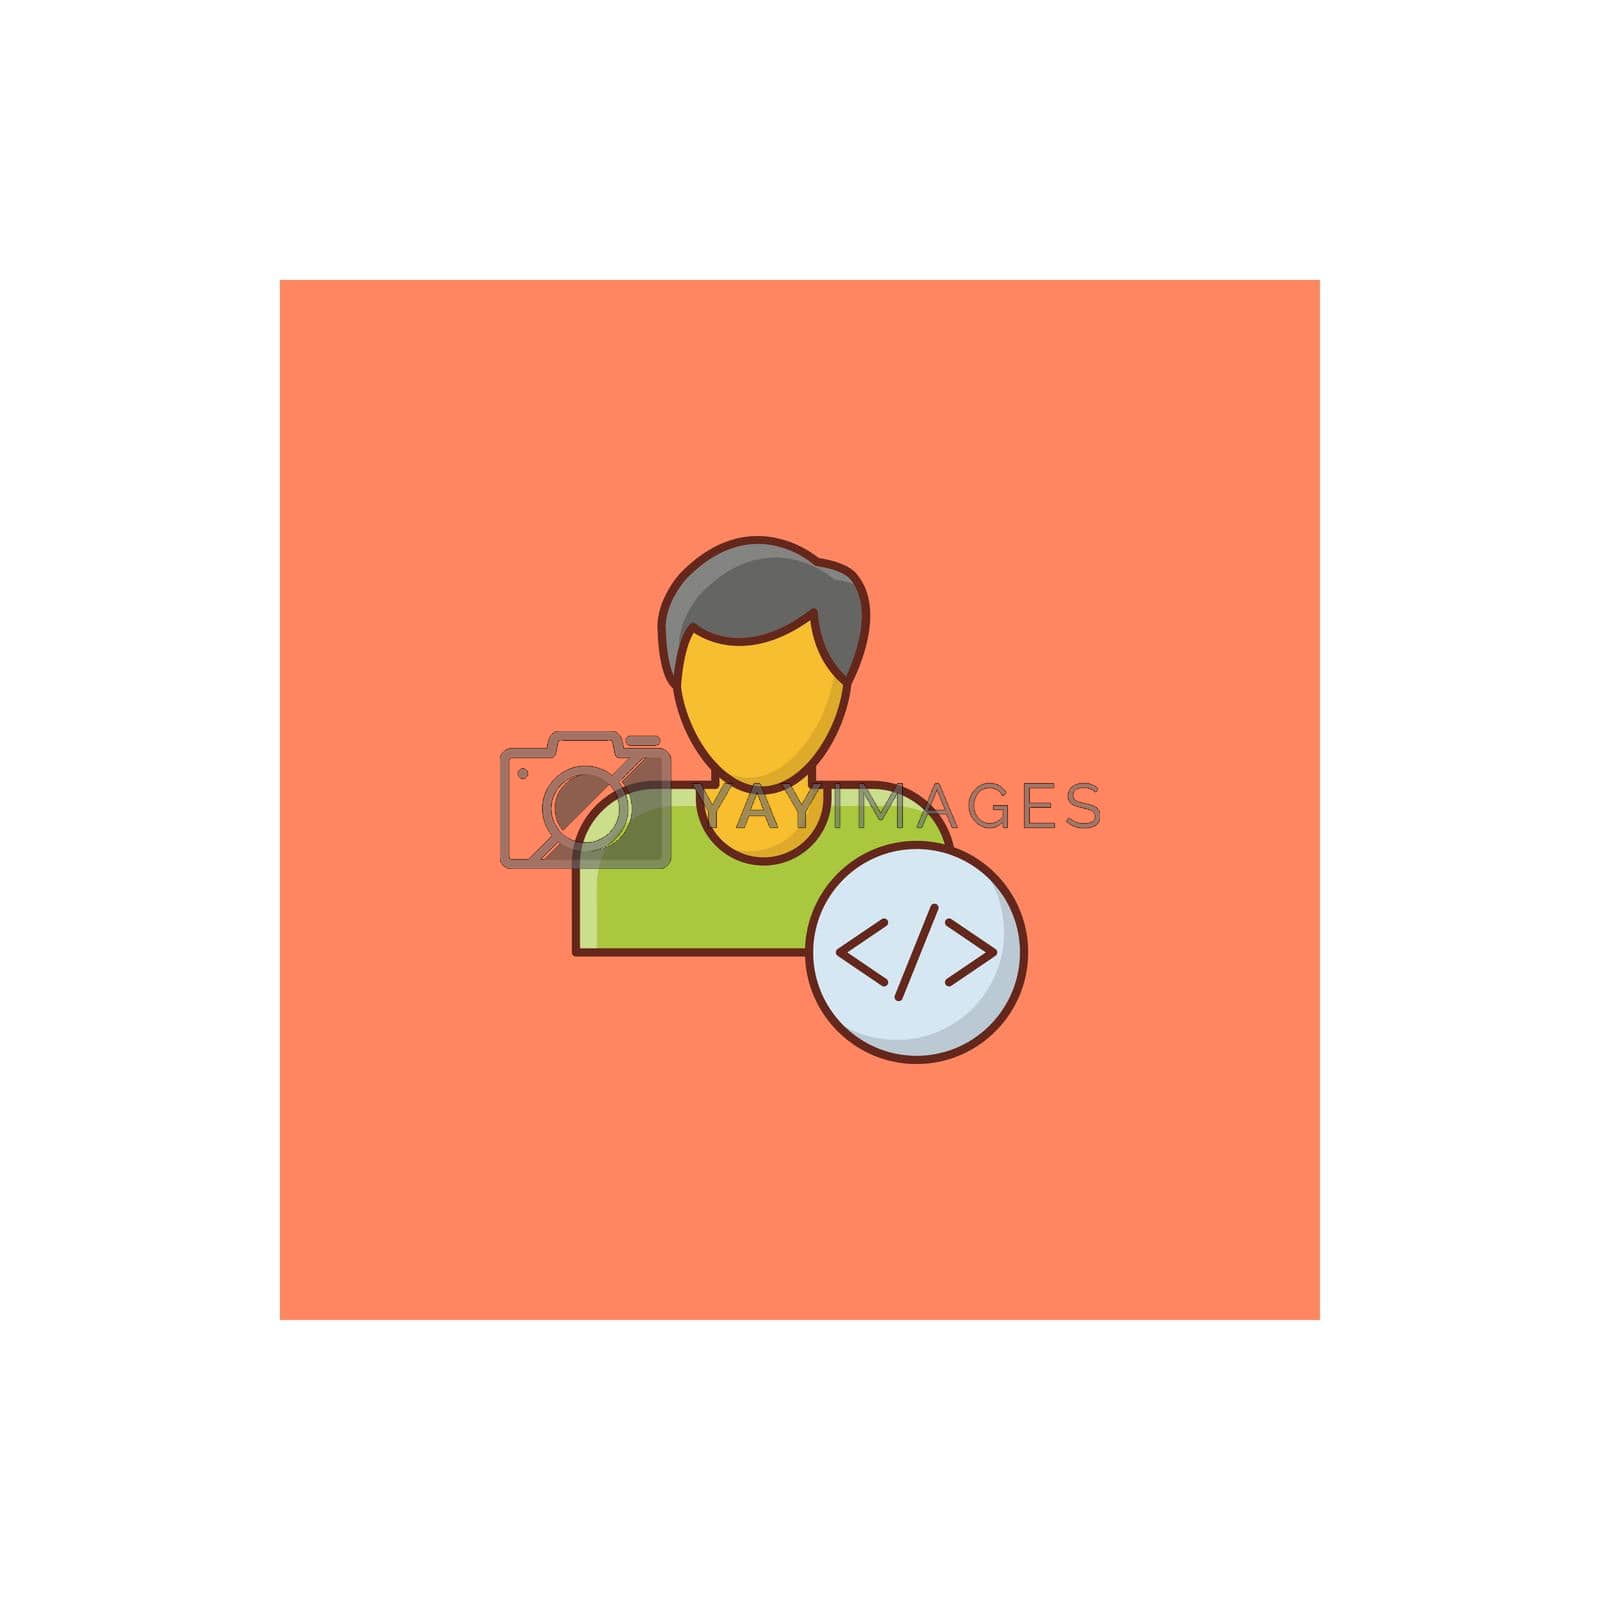 Royalty free image of coding by FlaticonsDesign